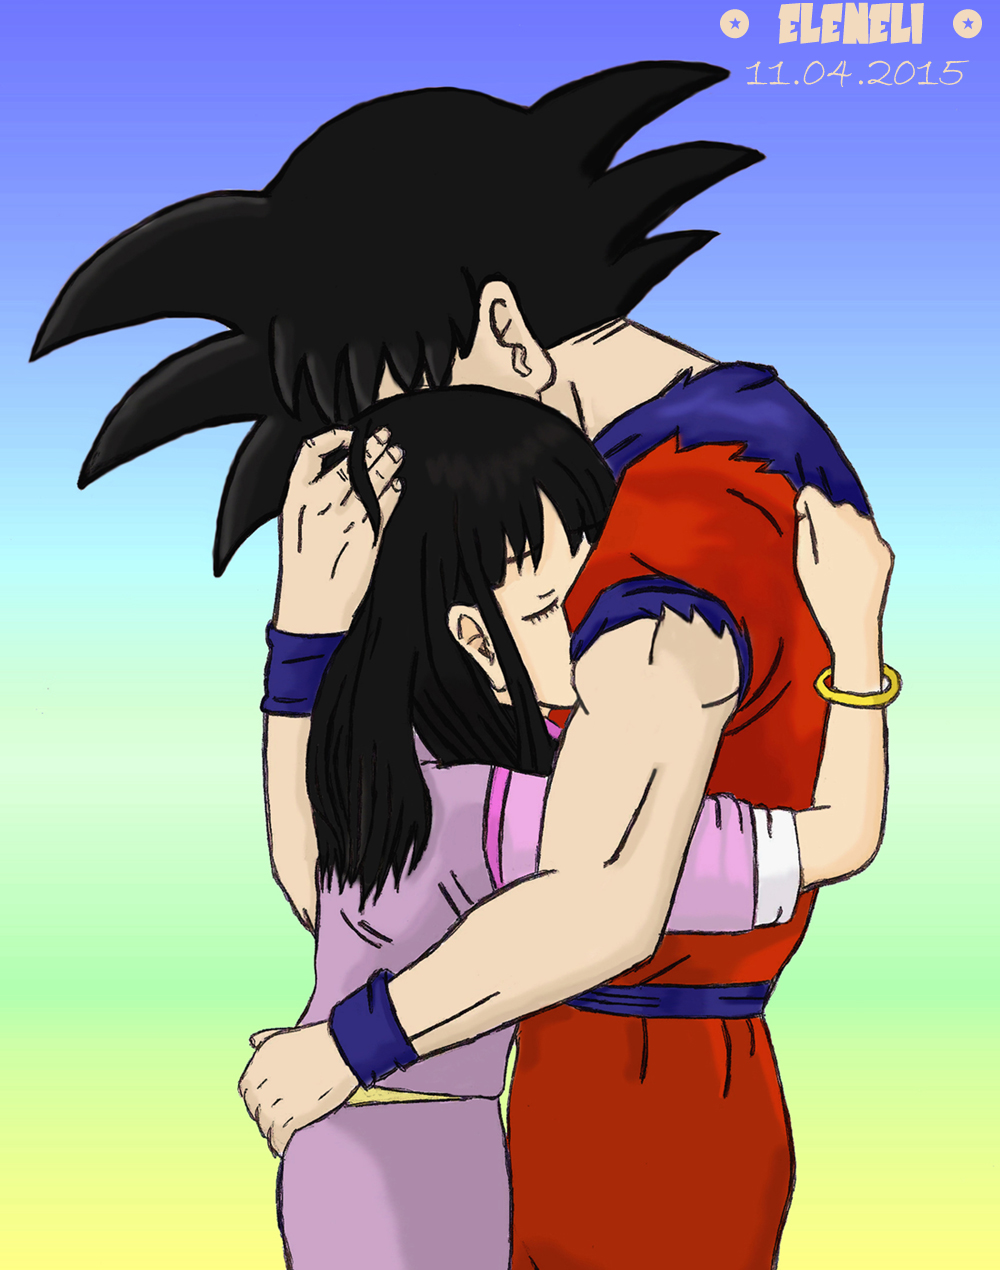 Don't leave me again - Goku and Chichi